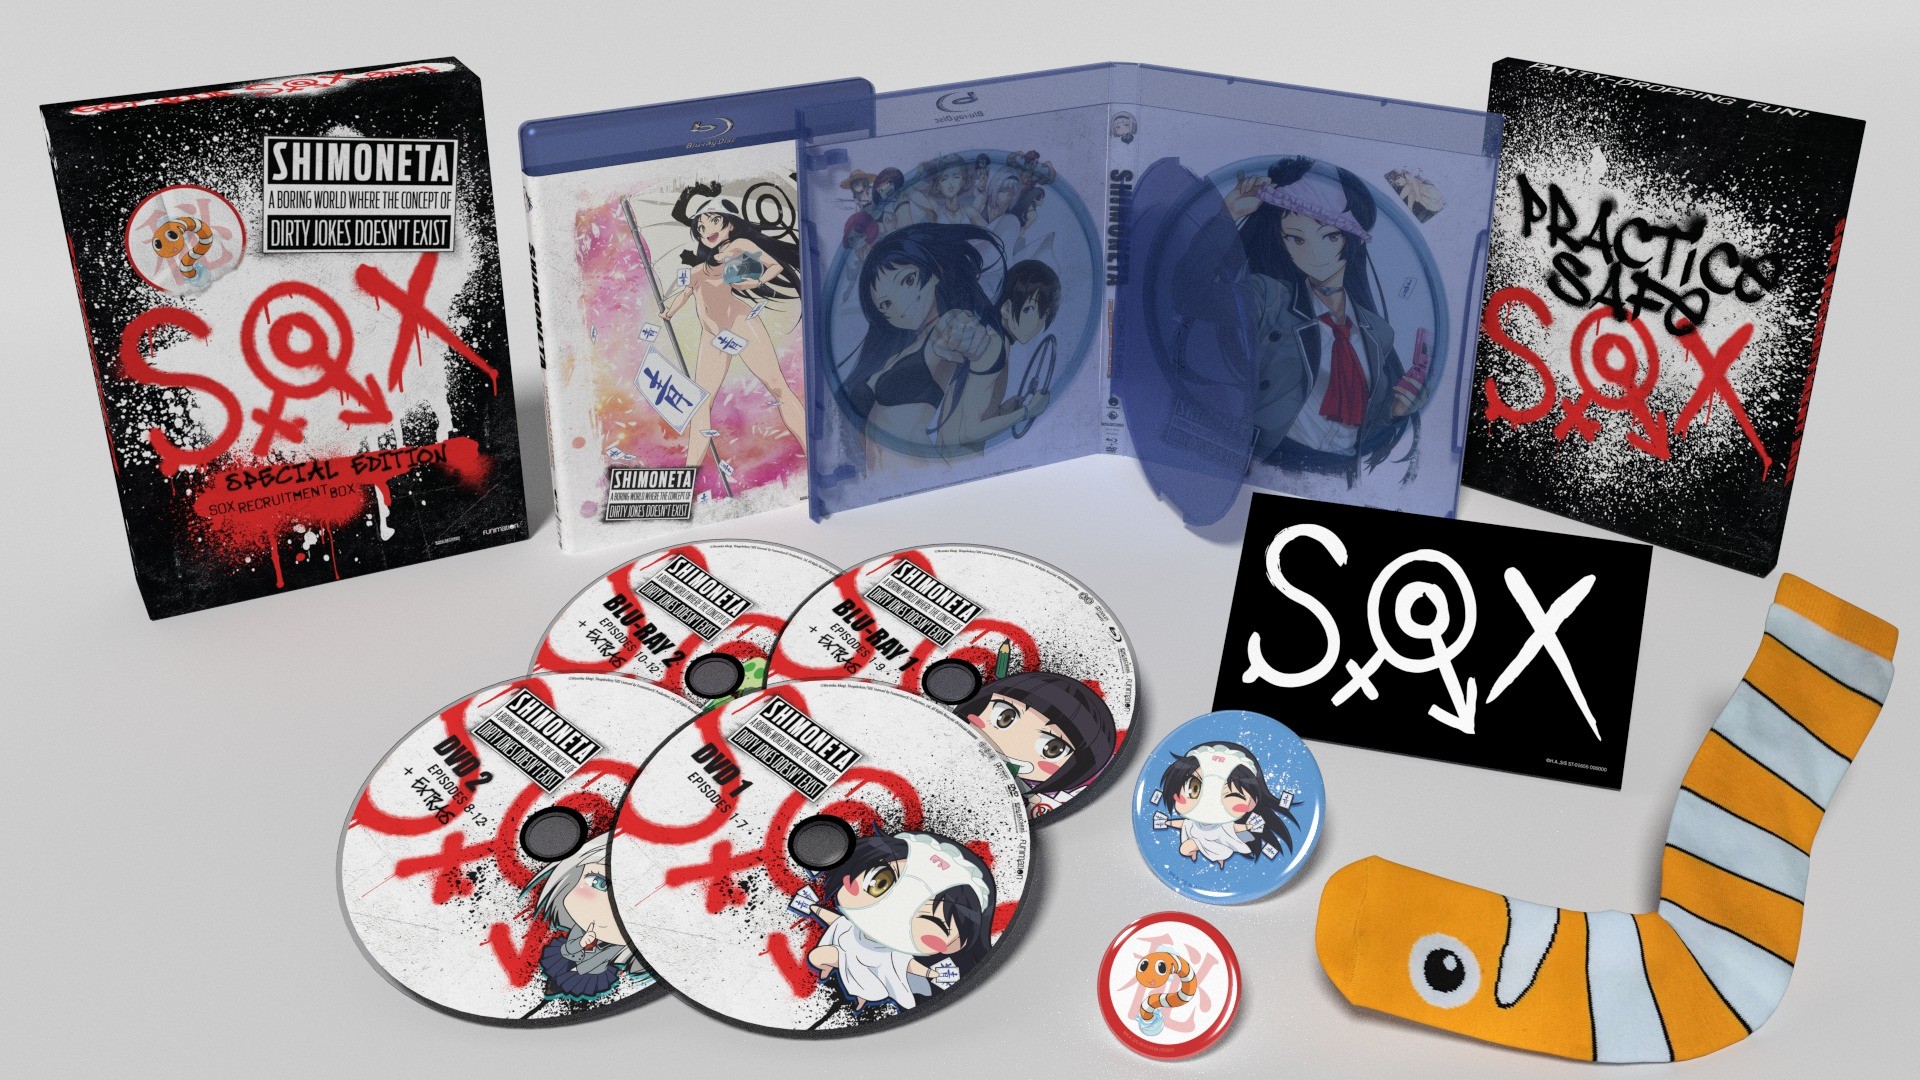 SHIMONETA A Boring World Where the Concept of Dirty Jokes Doesnt Exist – The Complete Series Blu ray Limited Edition Shimoneta to Iu Gainen ga Sonzai